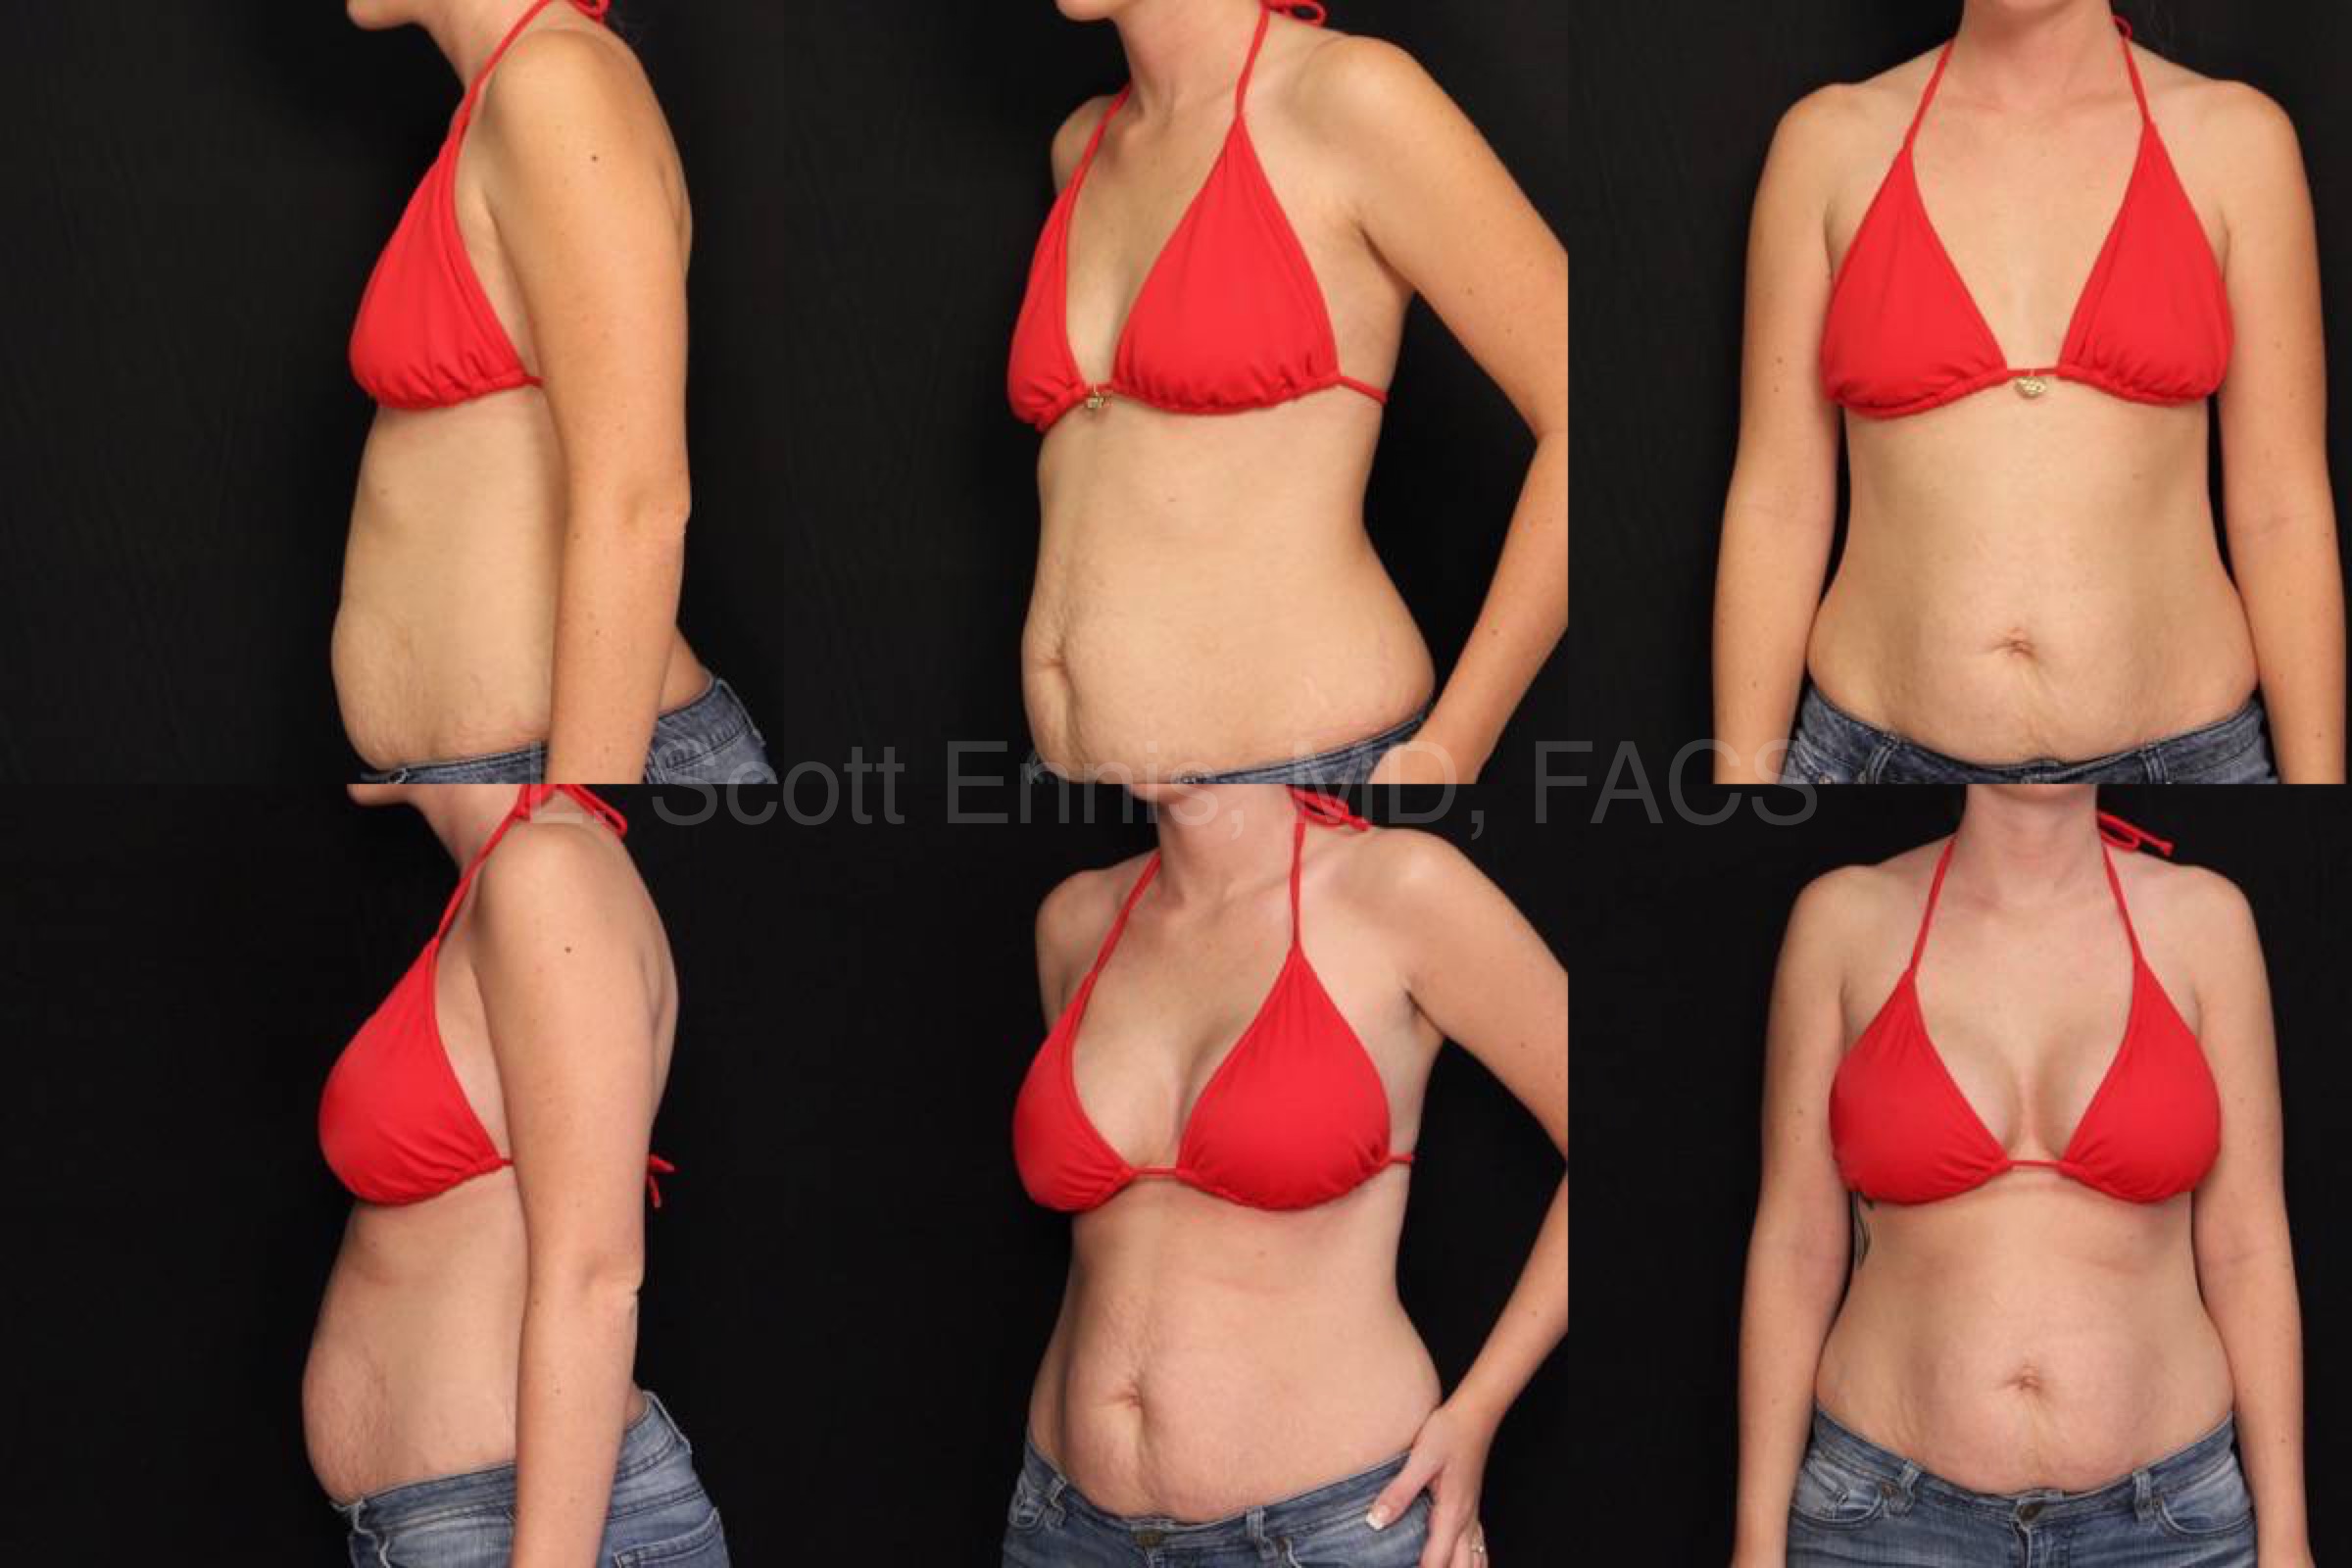 Endoscopic Transaxillary Breast Augmentation Sientra High Profile Gel R495 L465 Before and After Ennis Plastic Surgery Palm Beach Boca Raton Destin Miami Fort Lauderdale